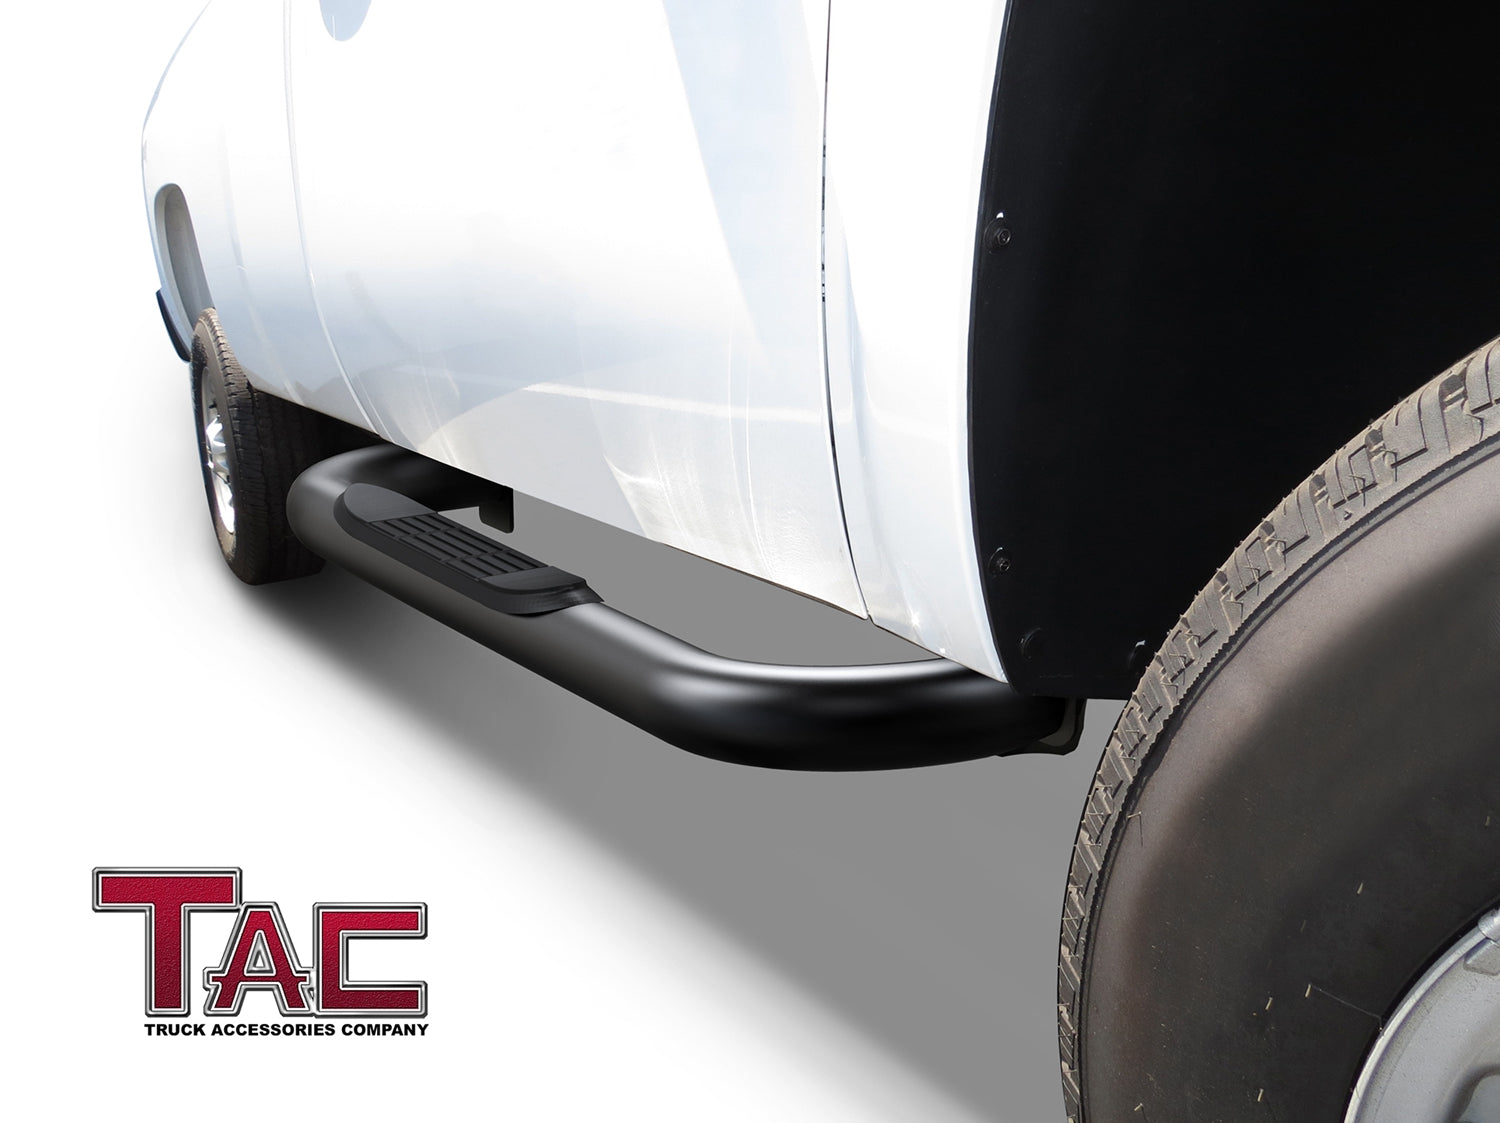 TAC Side Steps fit 1980-1996 Ford Bronco Full Size (97 HD Models Only) / Ford F-Series Regular Cab Pick Up (Incl. 97 HD) Pickup Truck 3" Black Side Bars Nerf Bars Step Rails Running Boards (2 Pieces) - 0